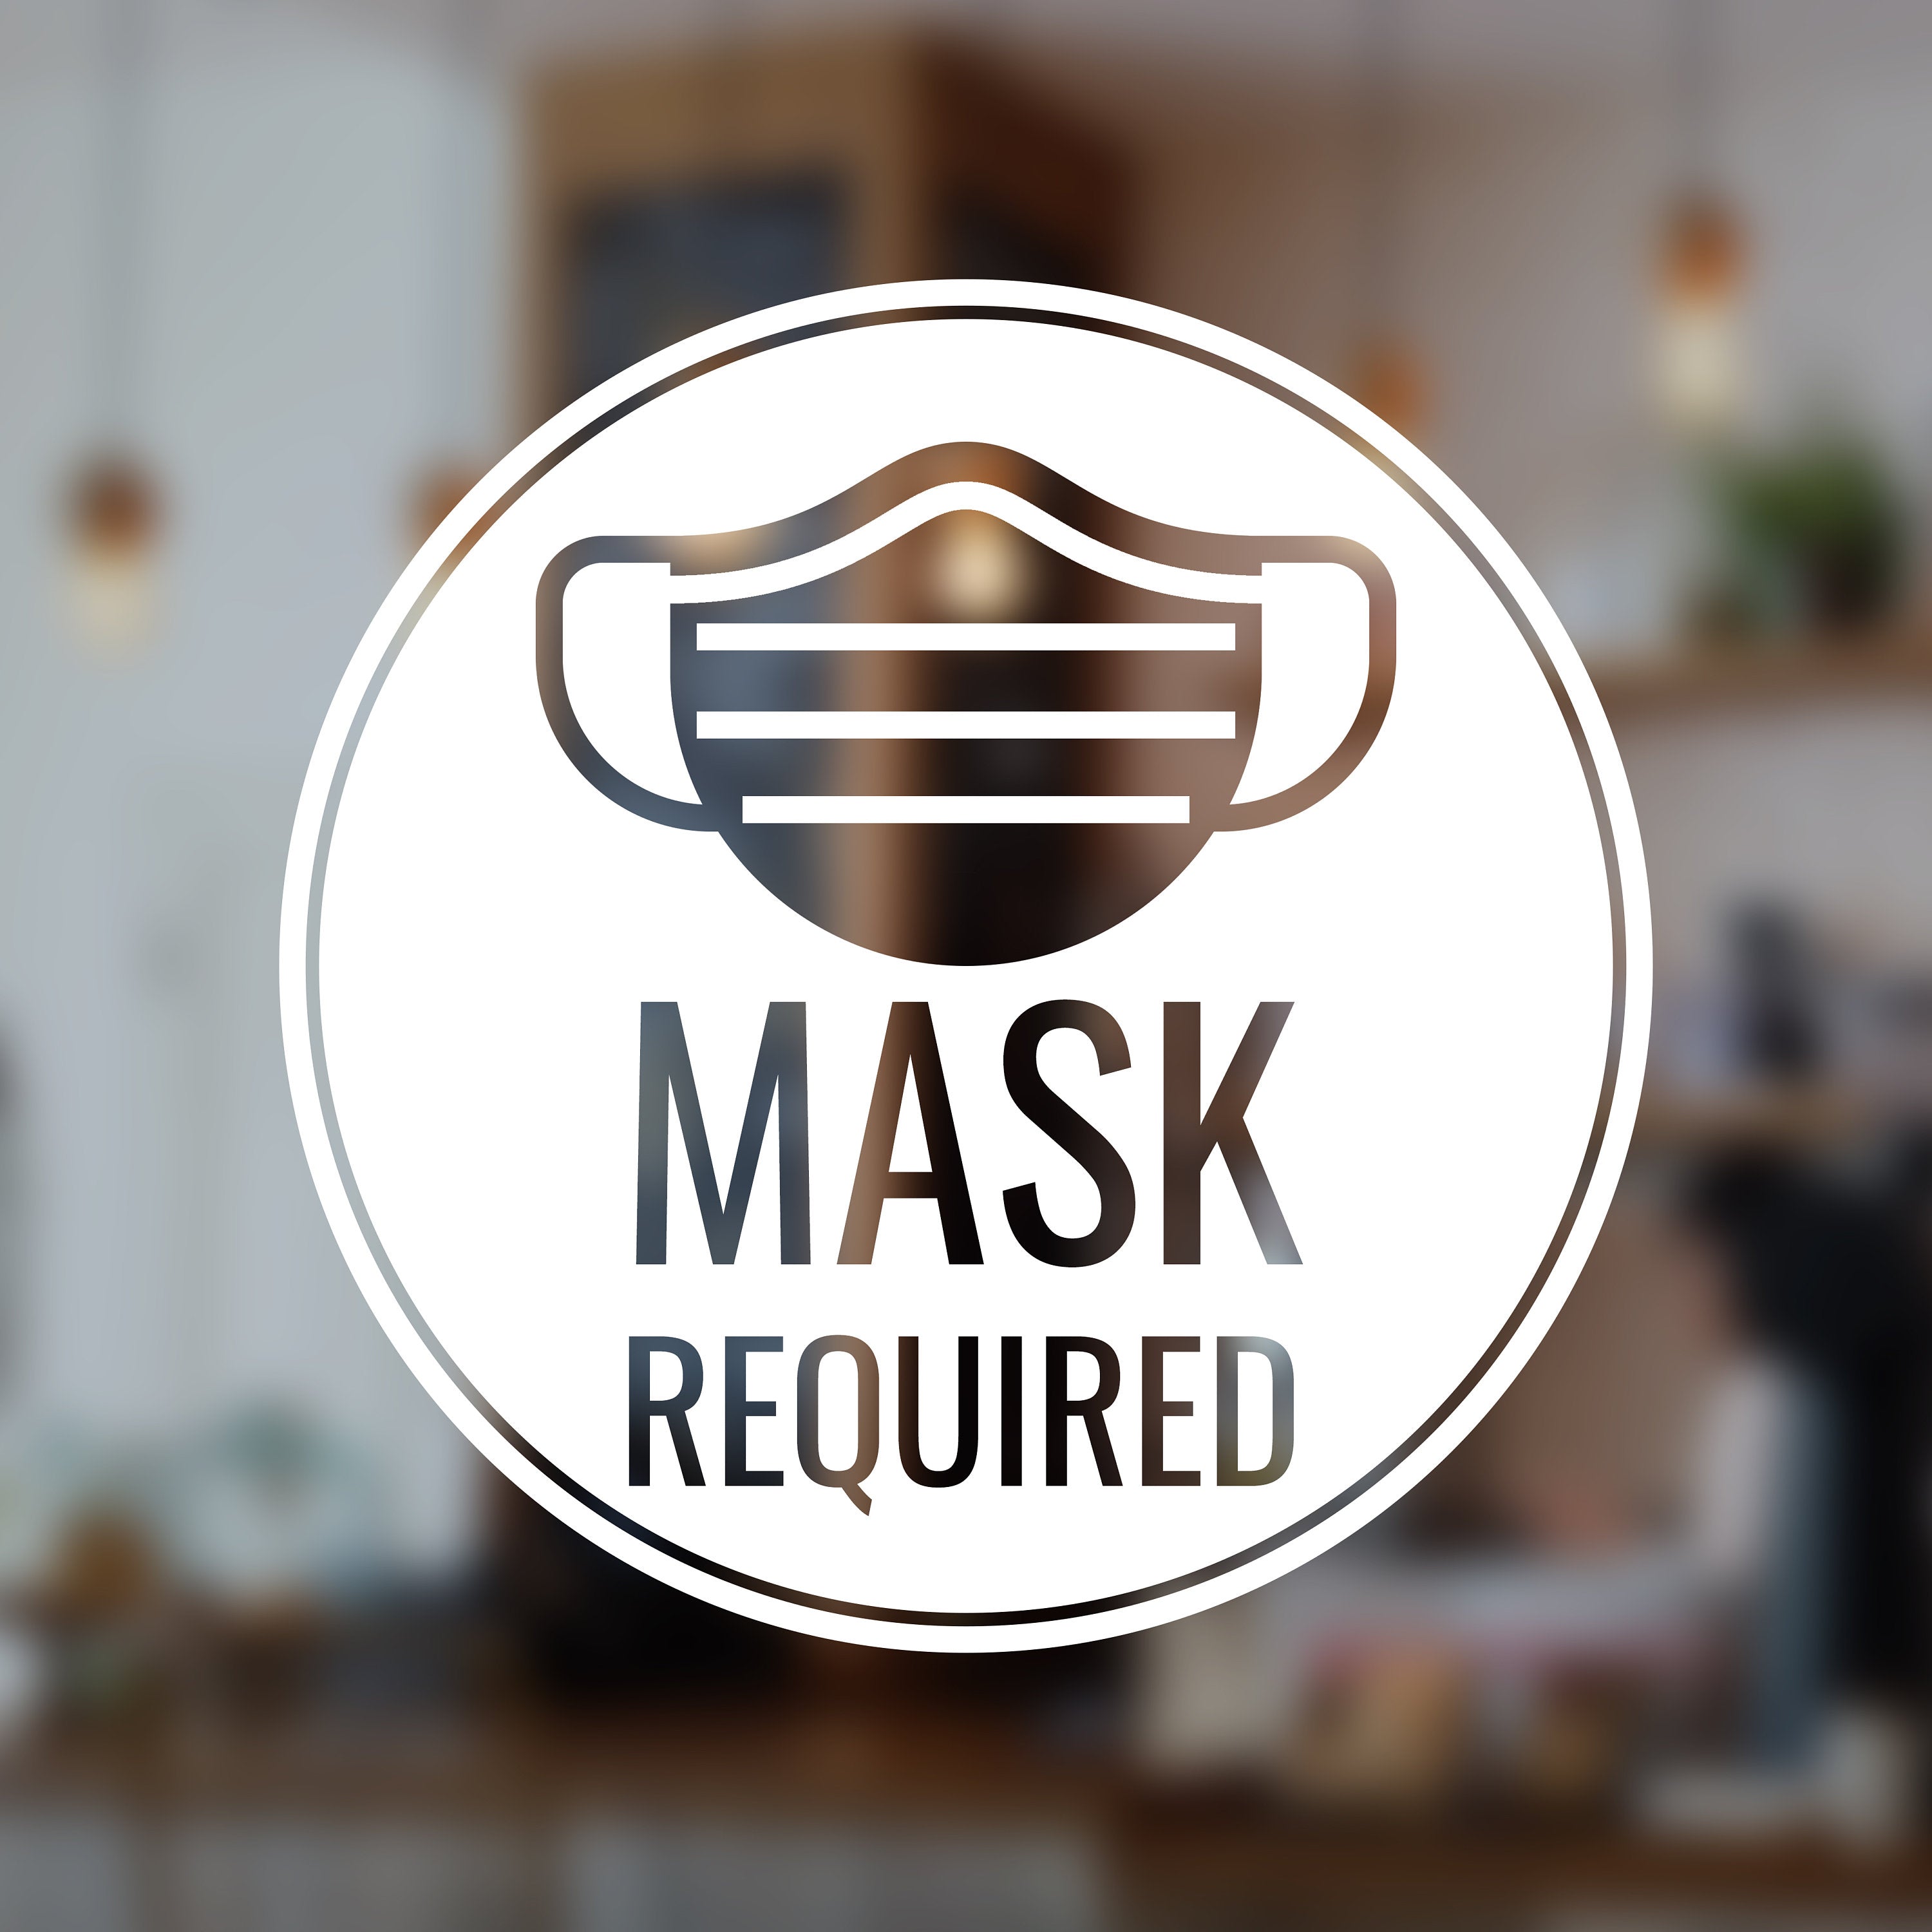 Mask Required Social Distancing Sign - Vinyl Decal for Windows, Doors, Walls of Small Businesses, Stores, Shops, Restaurants, and More!